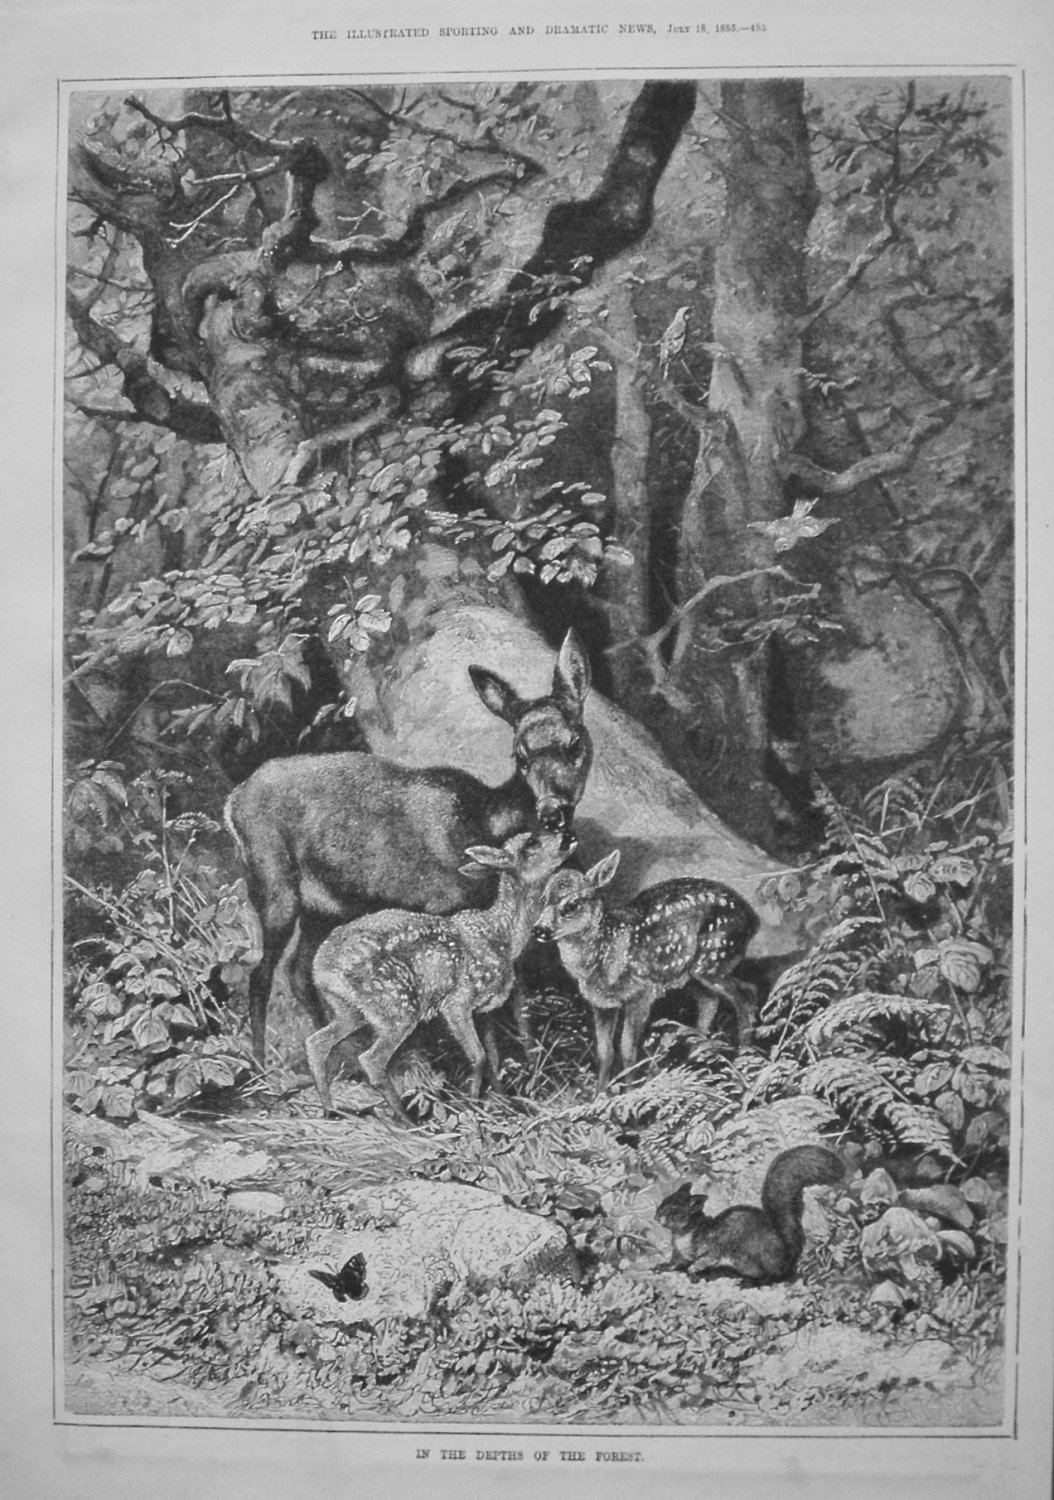 In The Depths Of The Forest. 1885